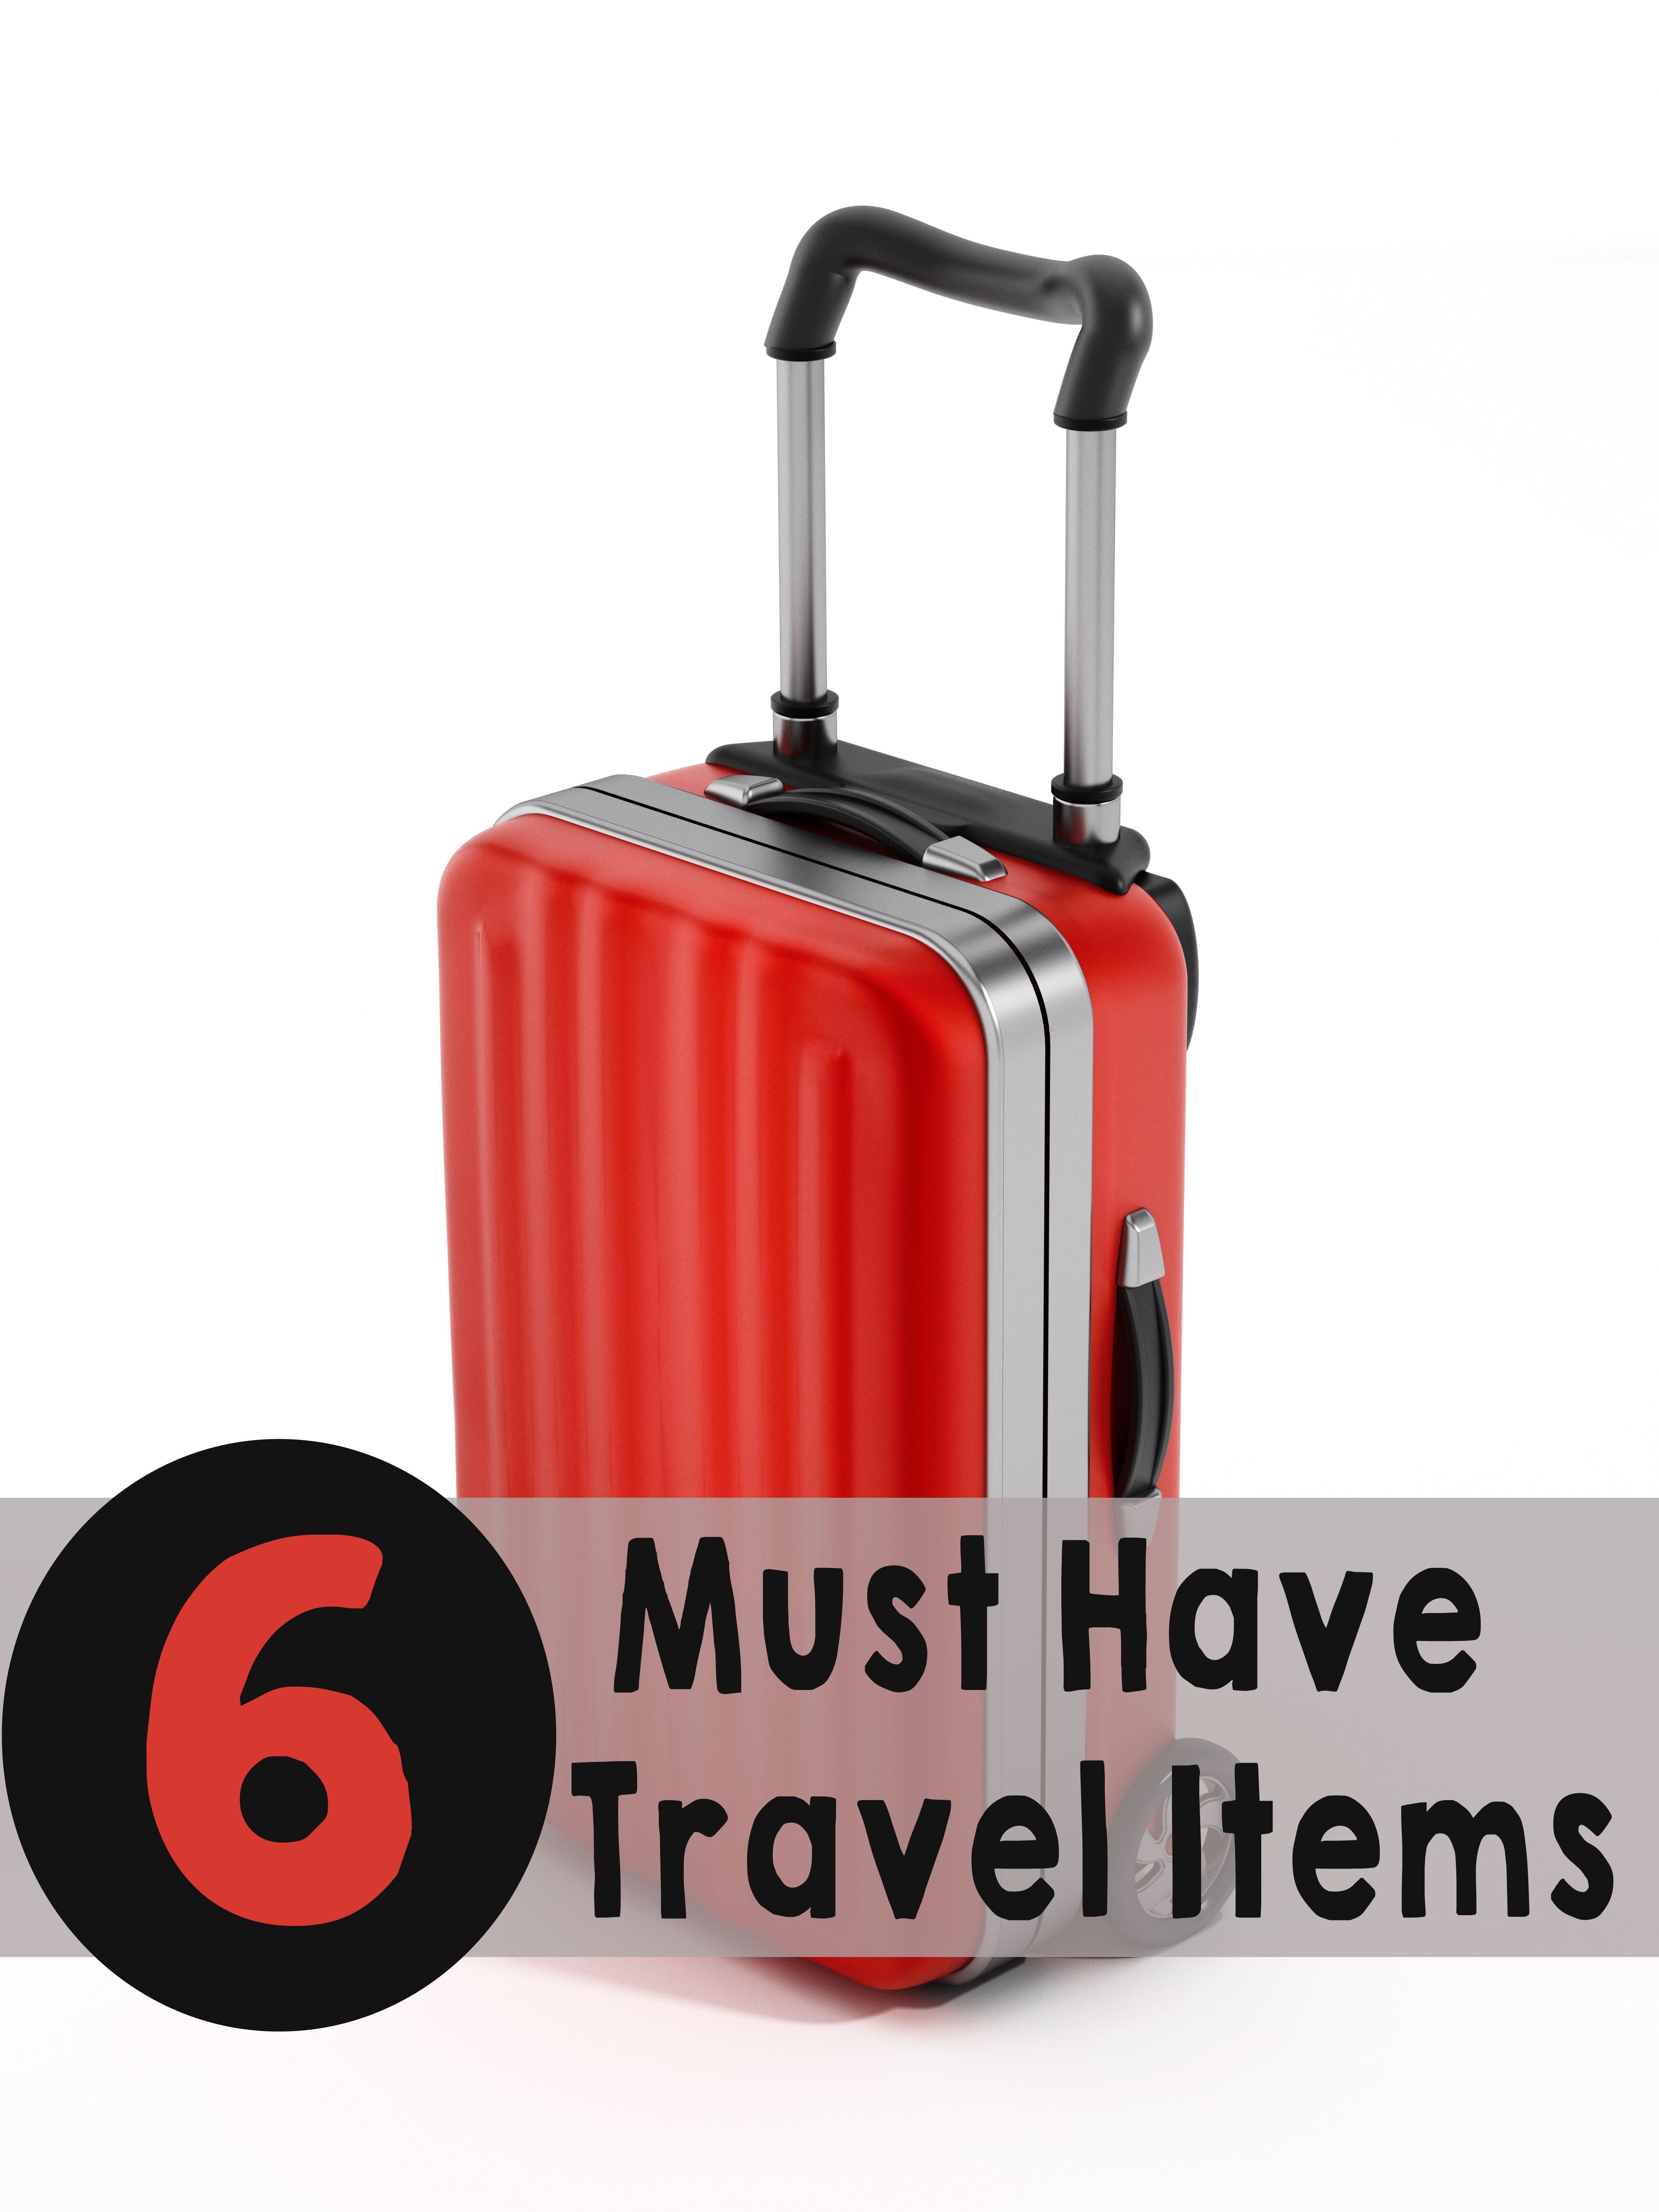 6 of My Must Have Travel Items that You can find at CVS